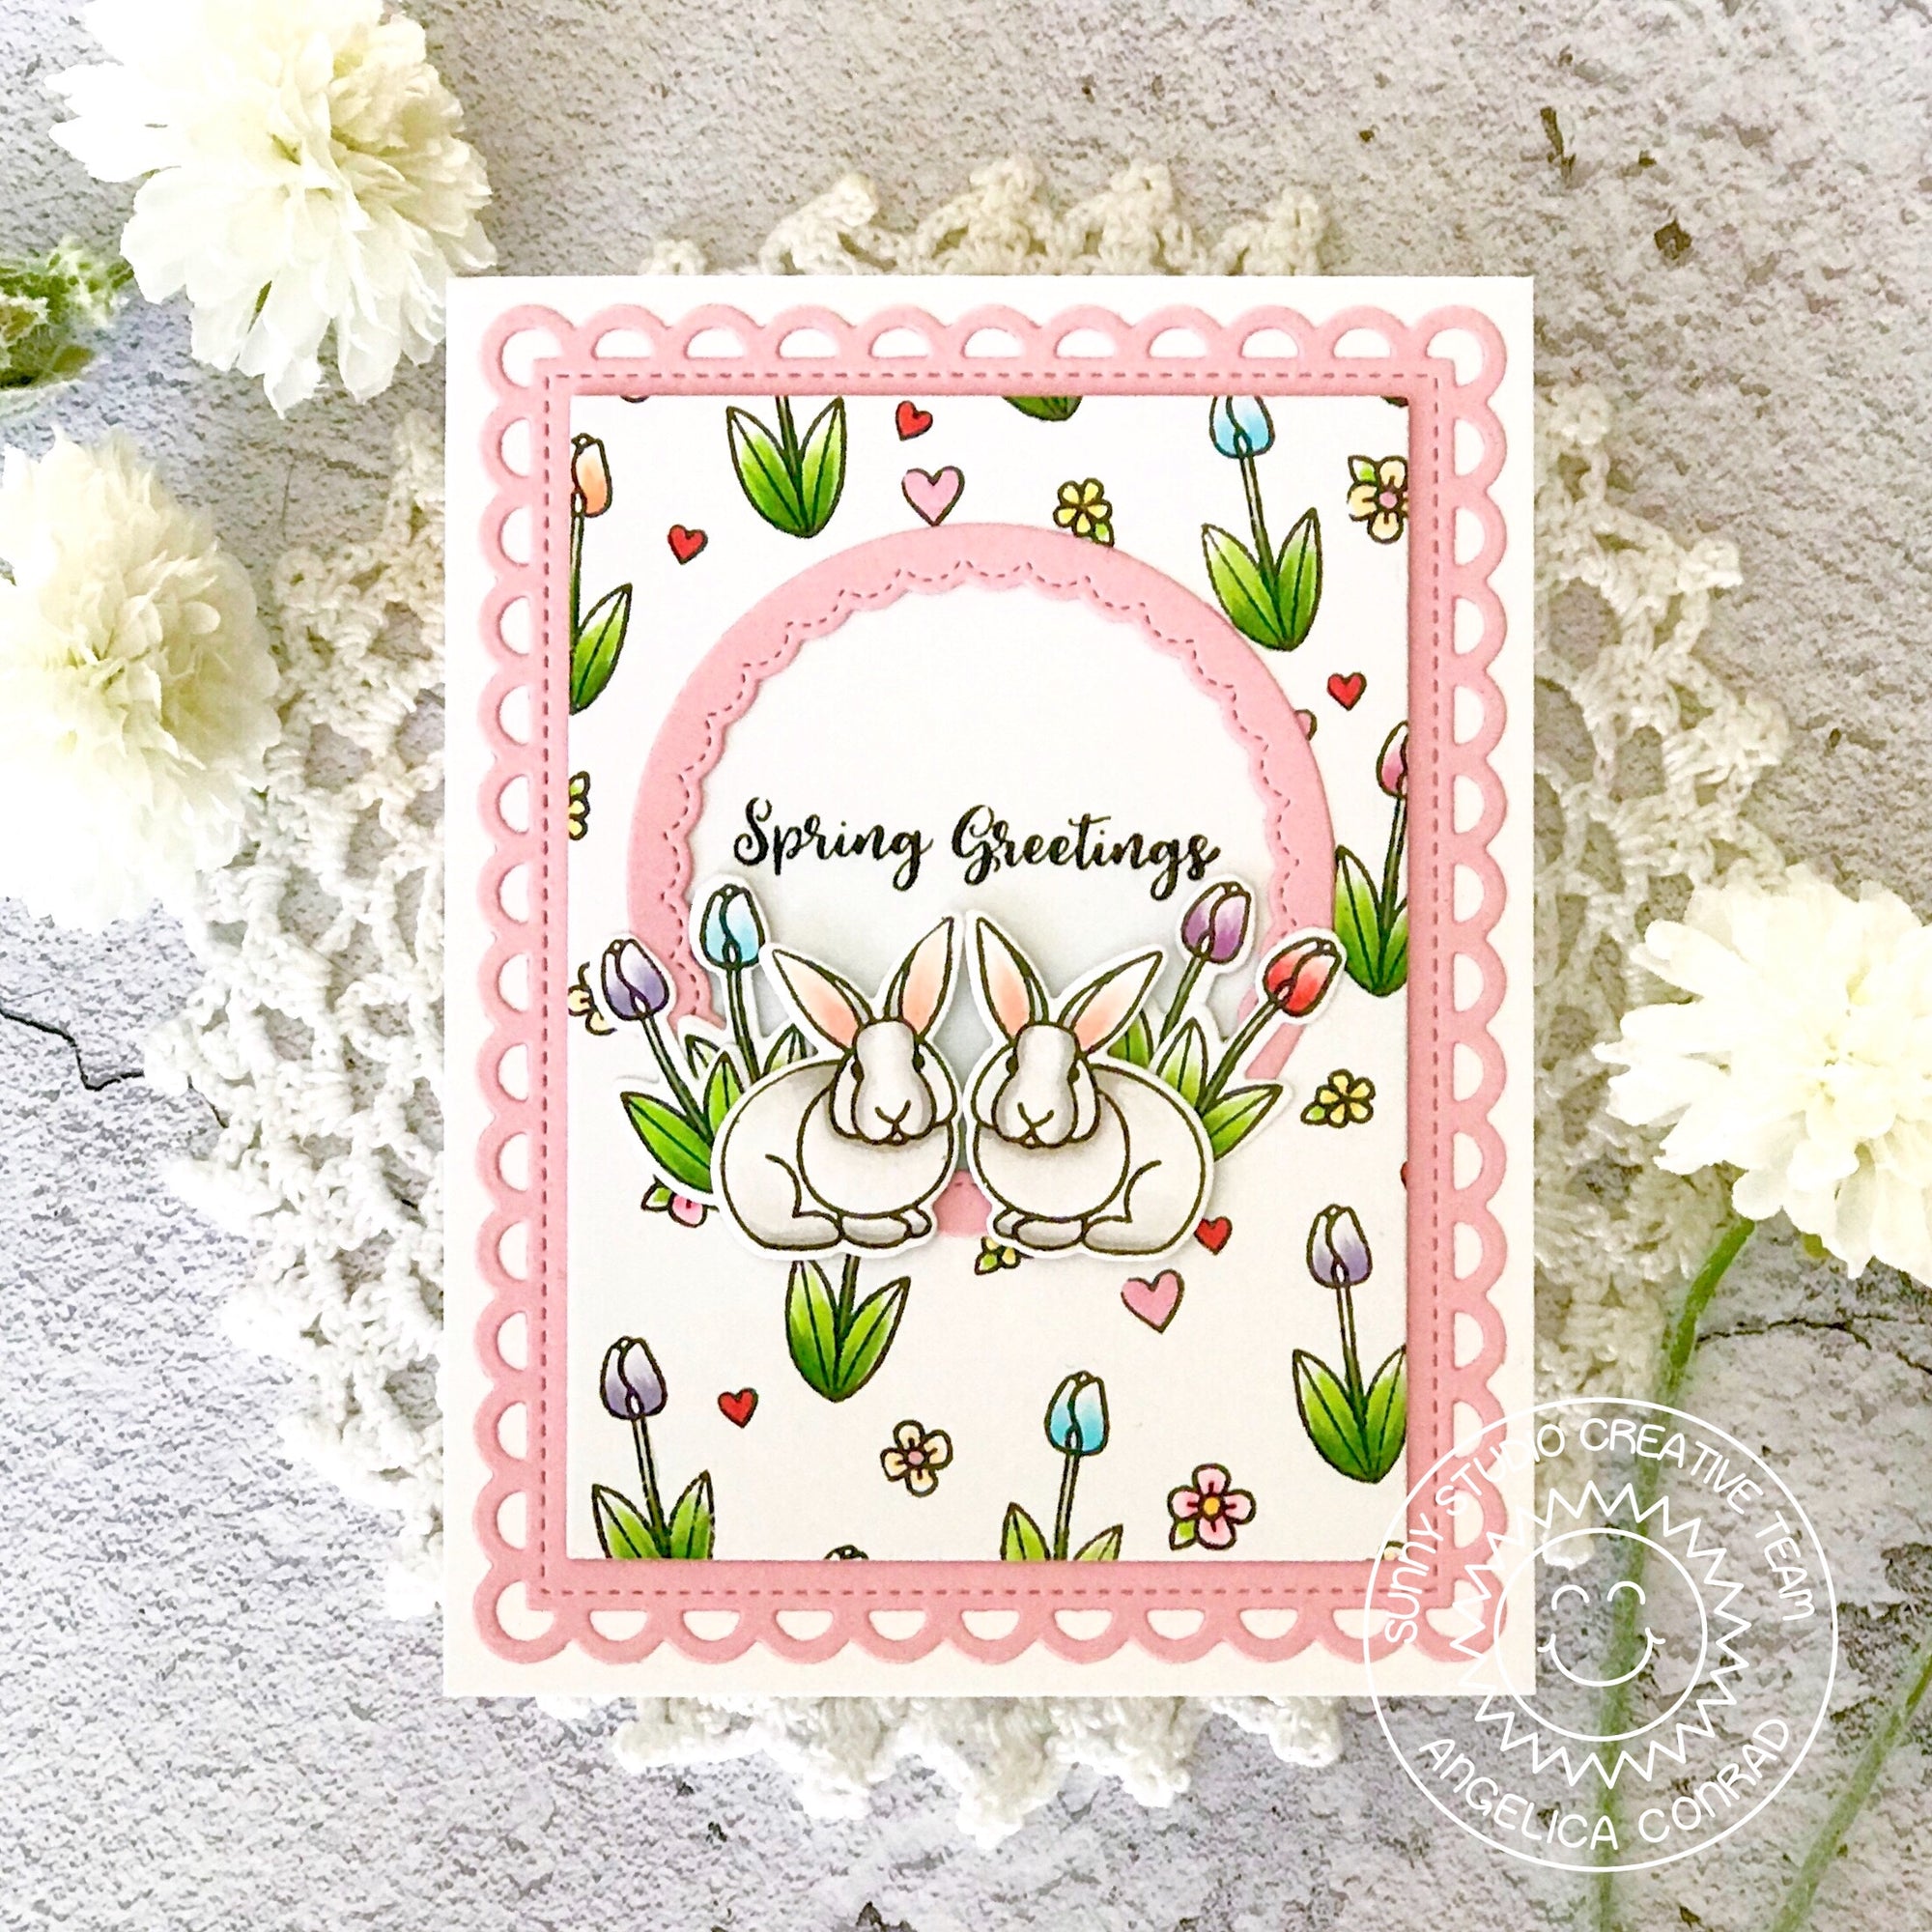 Sunny Studio Stamps Spring Greetings Easter Bunny Pink Scalloped Card (using Frilly Frames Lattice Metal Cutting Dies)